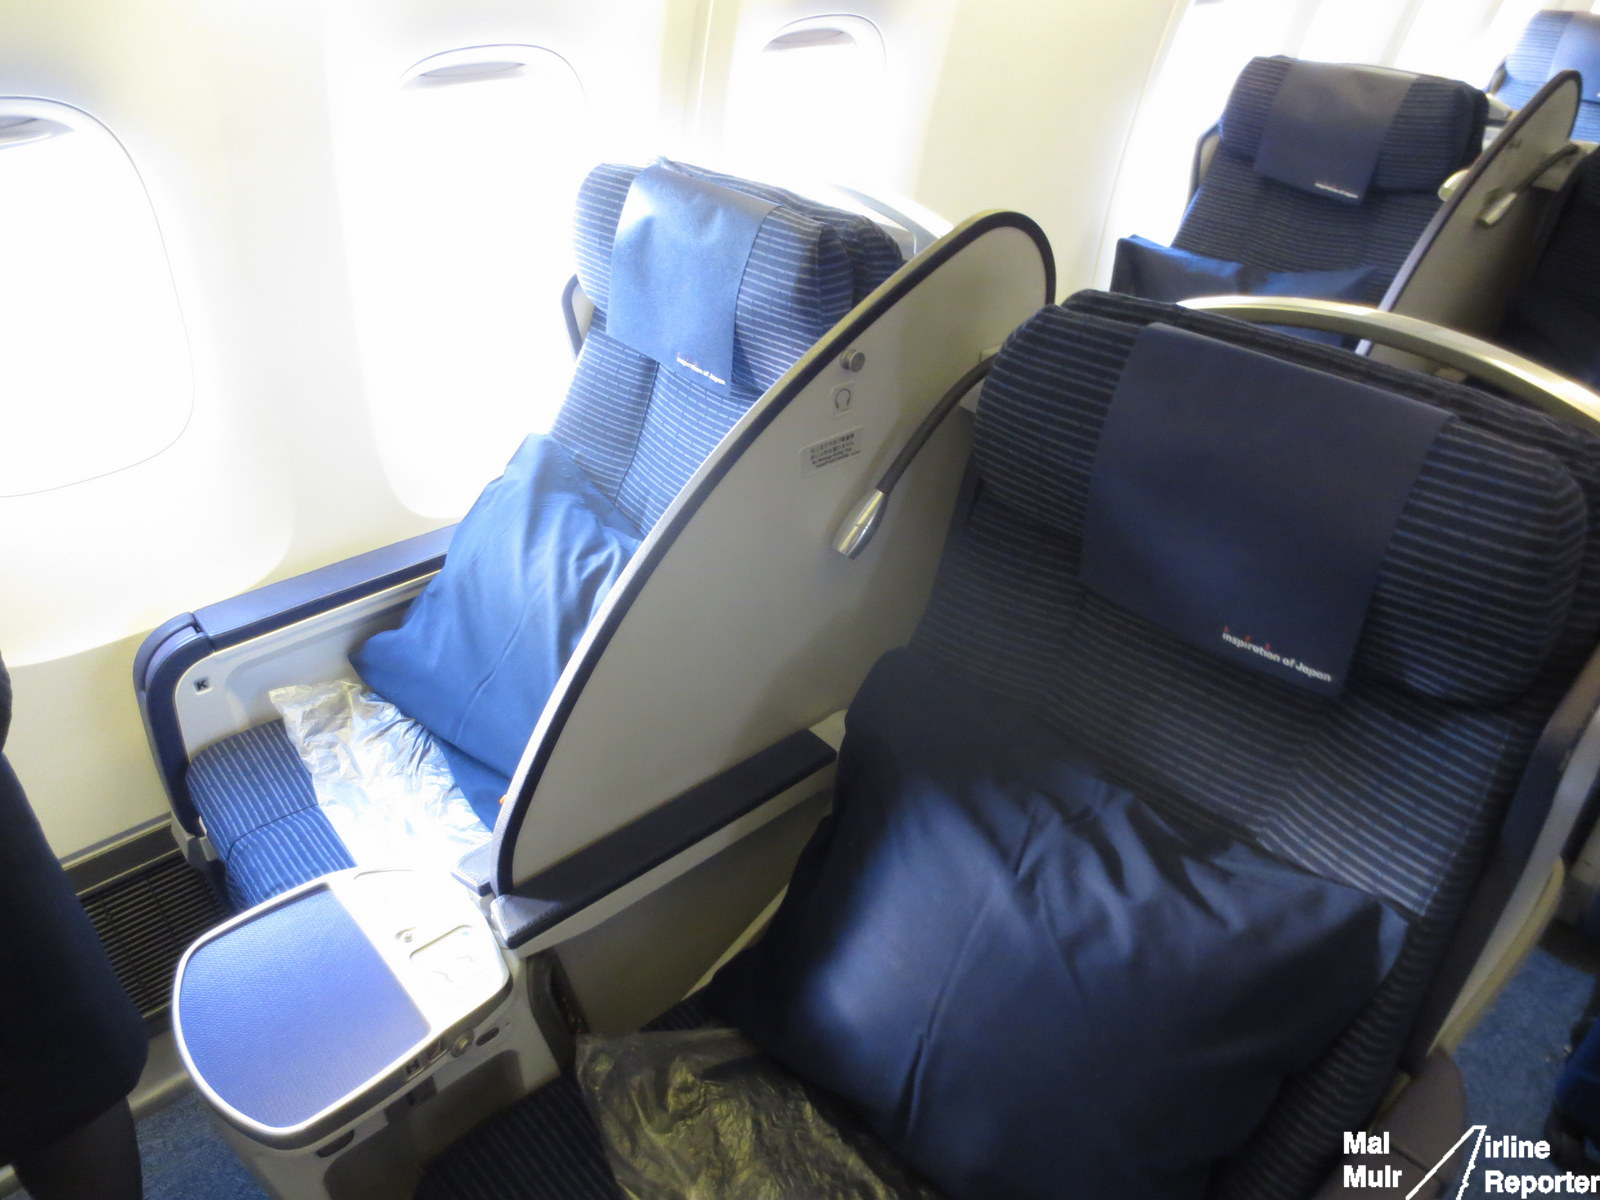 Services for Economy Class Passengers, Fly with ANA, The ANA Experience